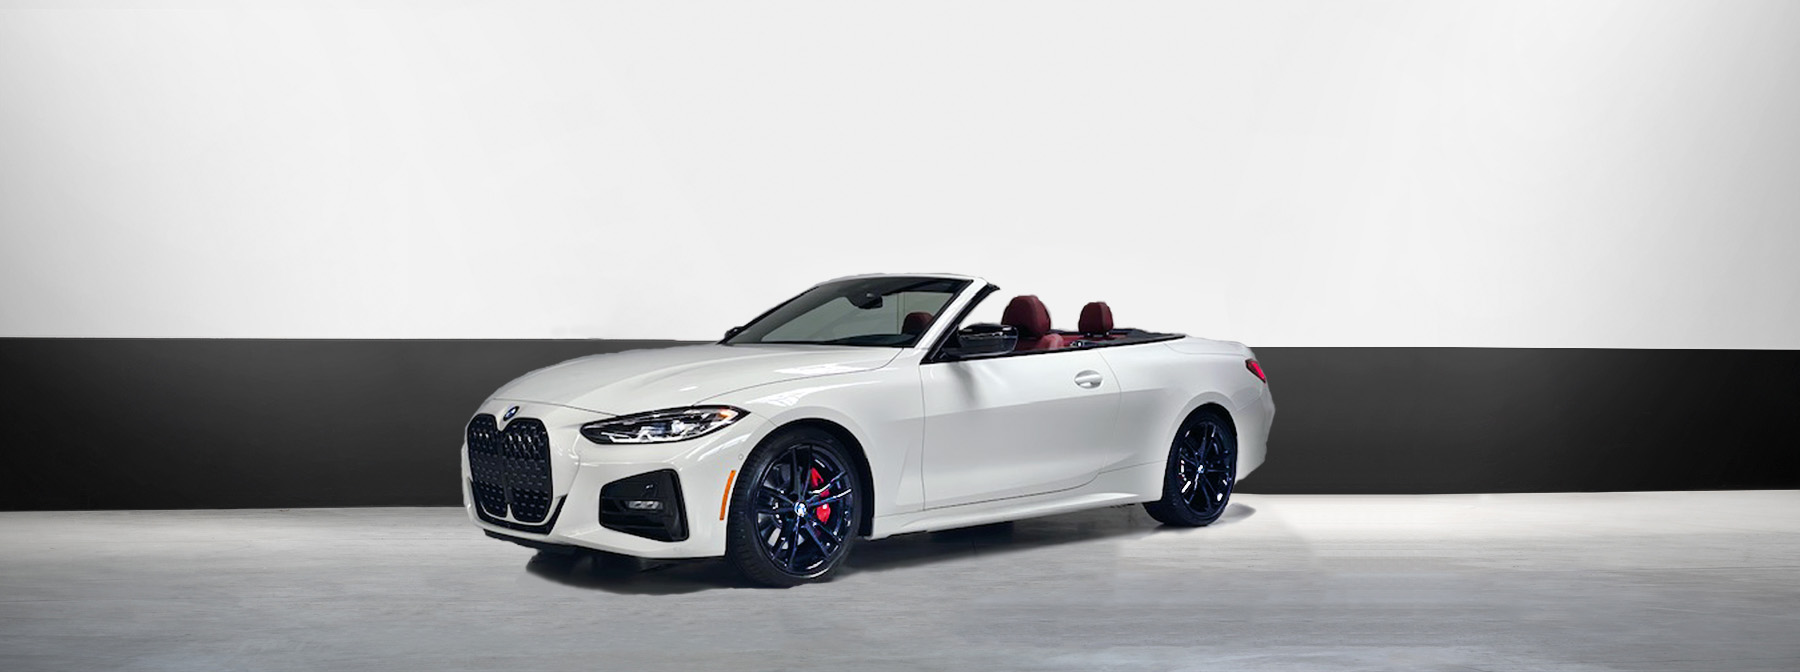 bmw convertible rental 430i in white